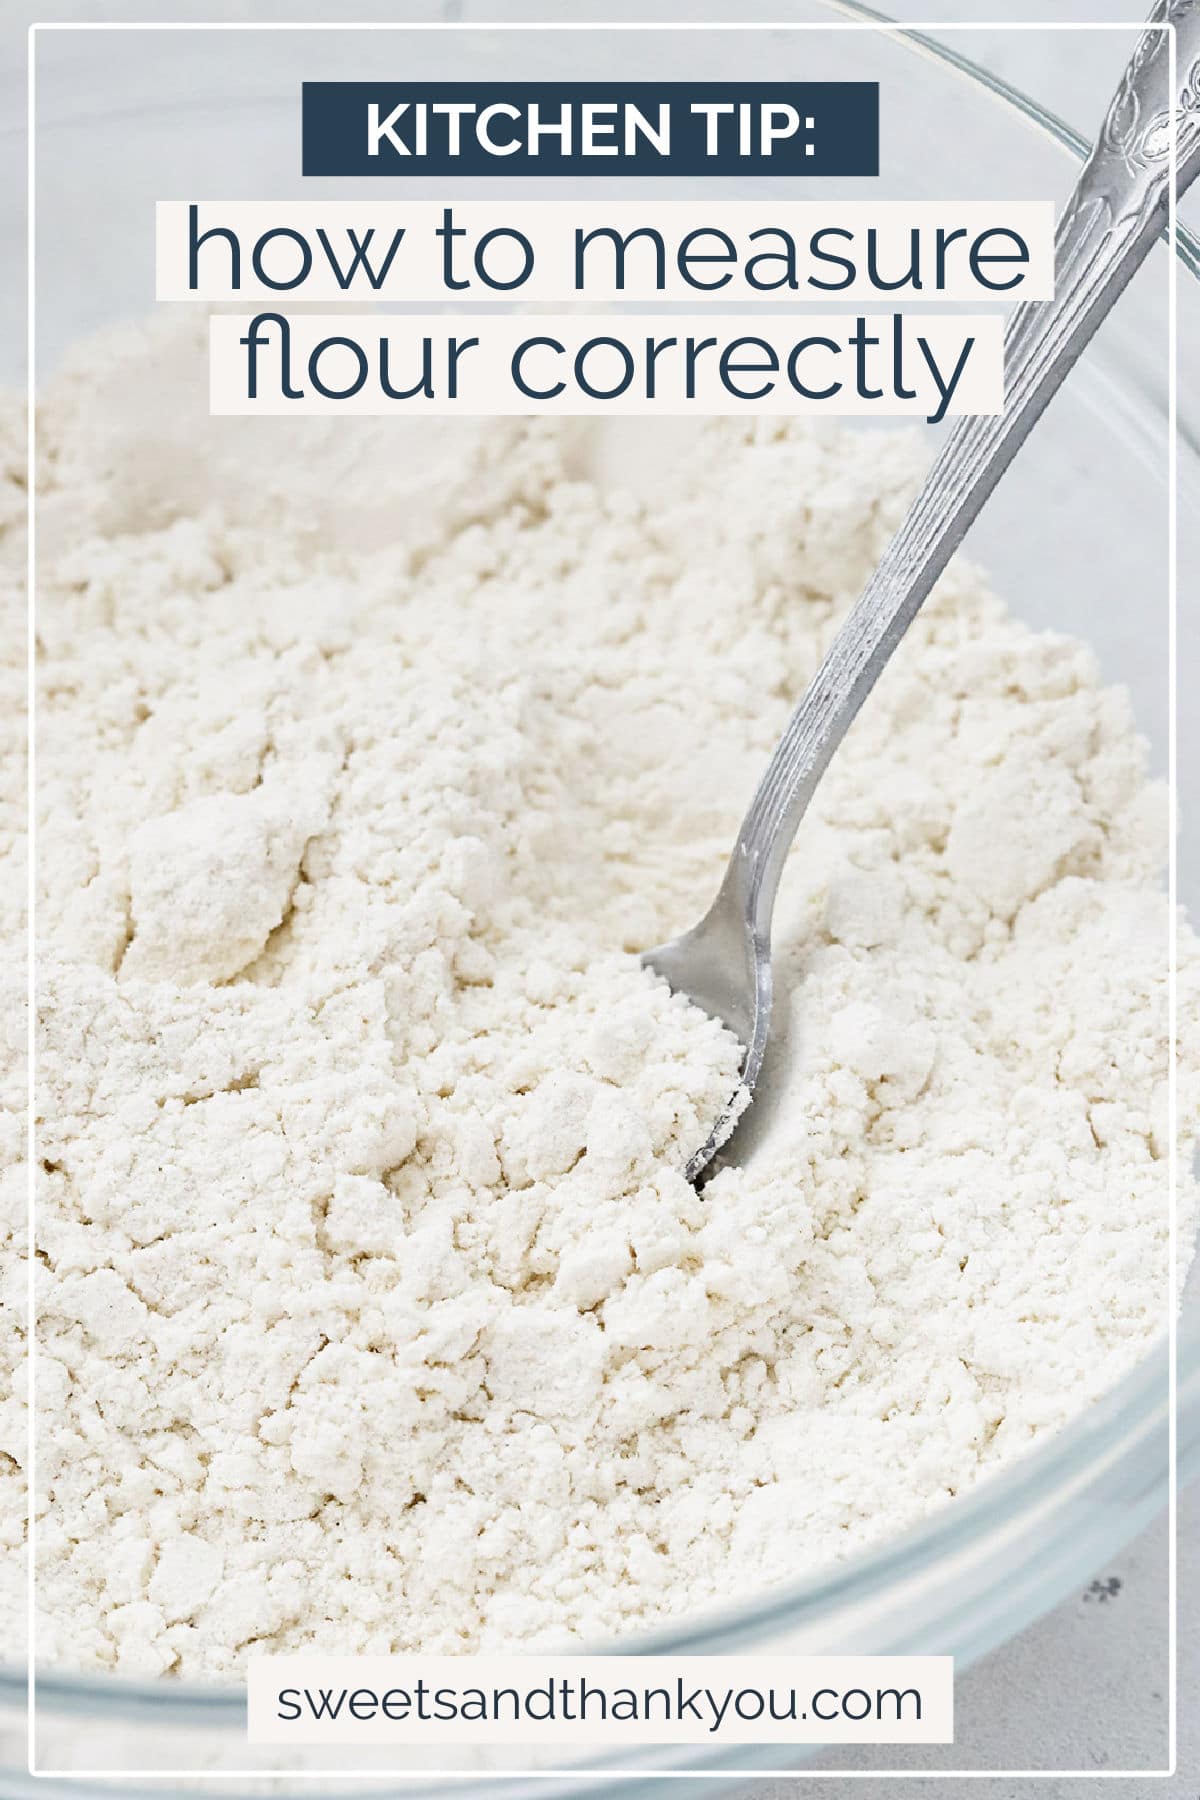 How to Measure Flour Correctly - How to use the scoop & level method to accurately measure your flour. This simple trick will give you better baked goods every time! // Baking Tips // Scoop and Level Method For Measuring Flour // #glutenfreebaking #bakingtips #kitchentip #kitchenhack #glutenfree